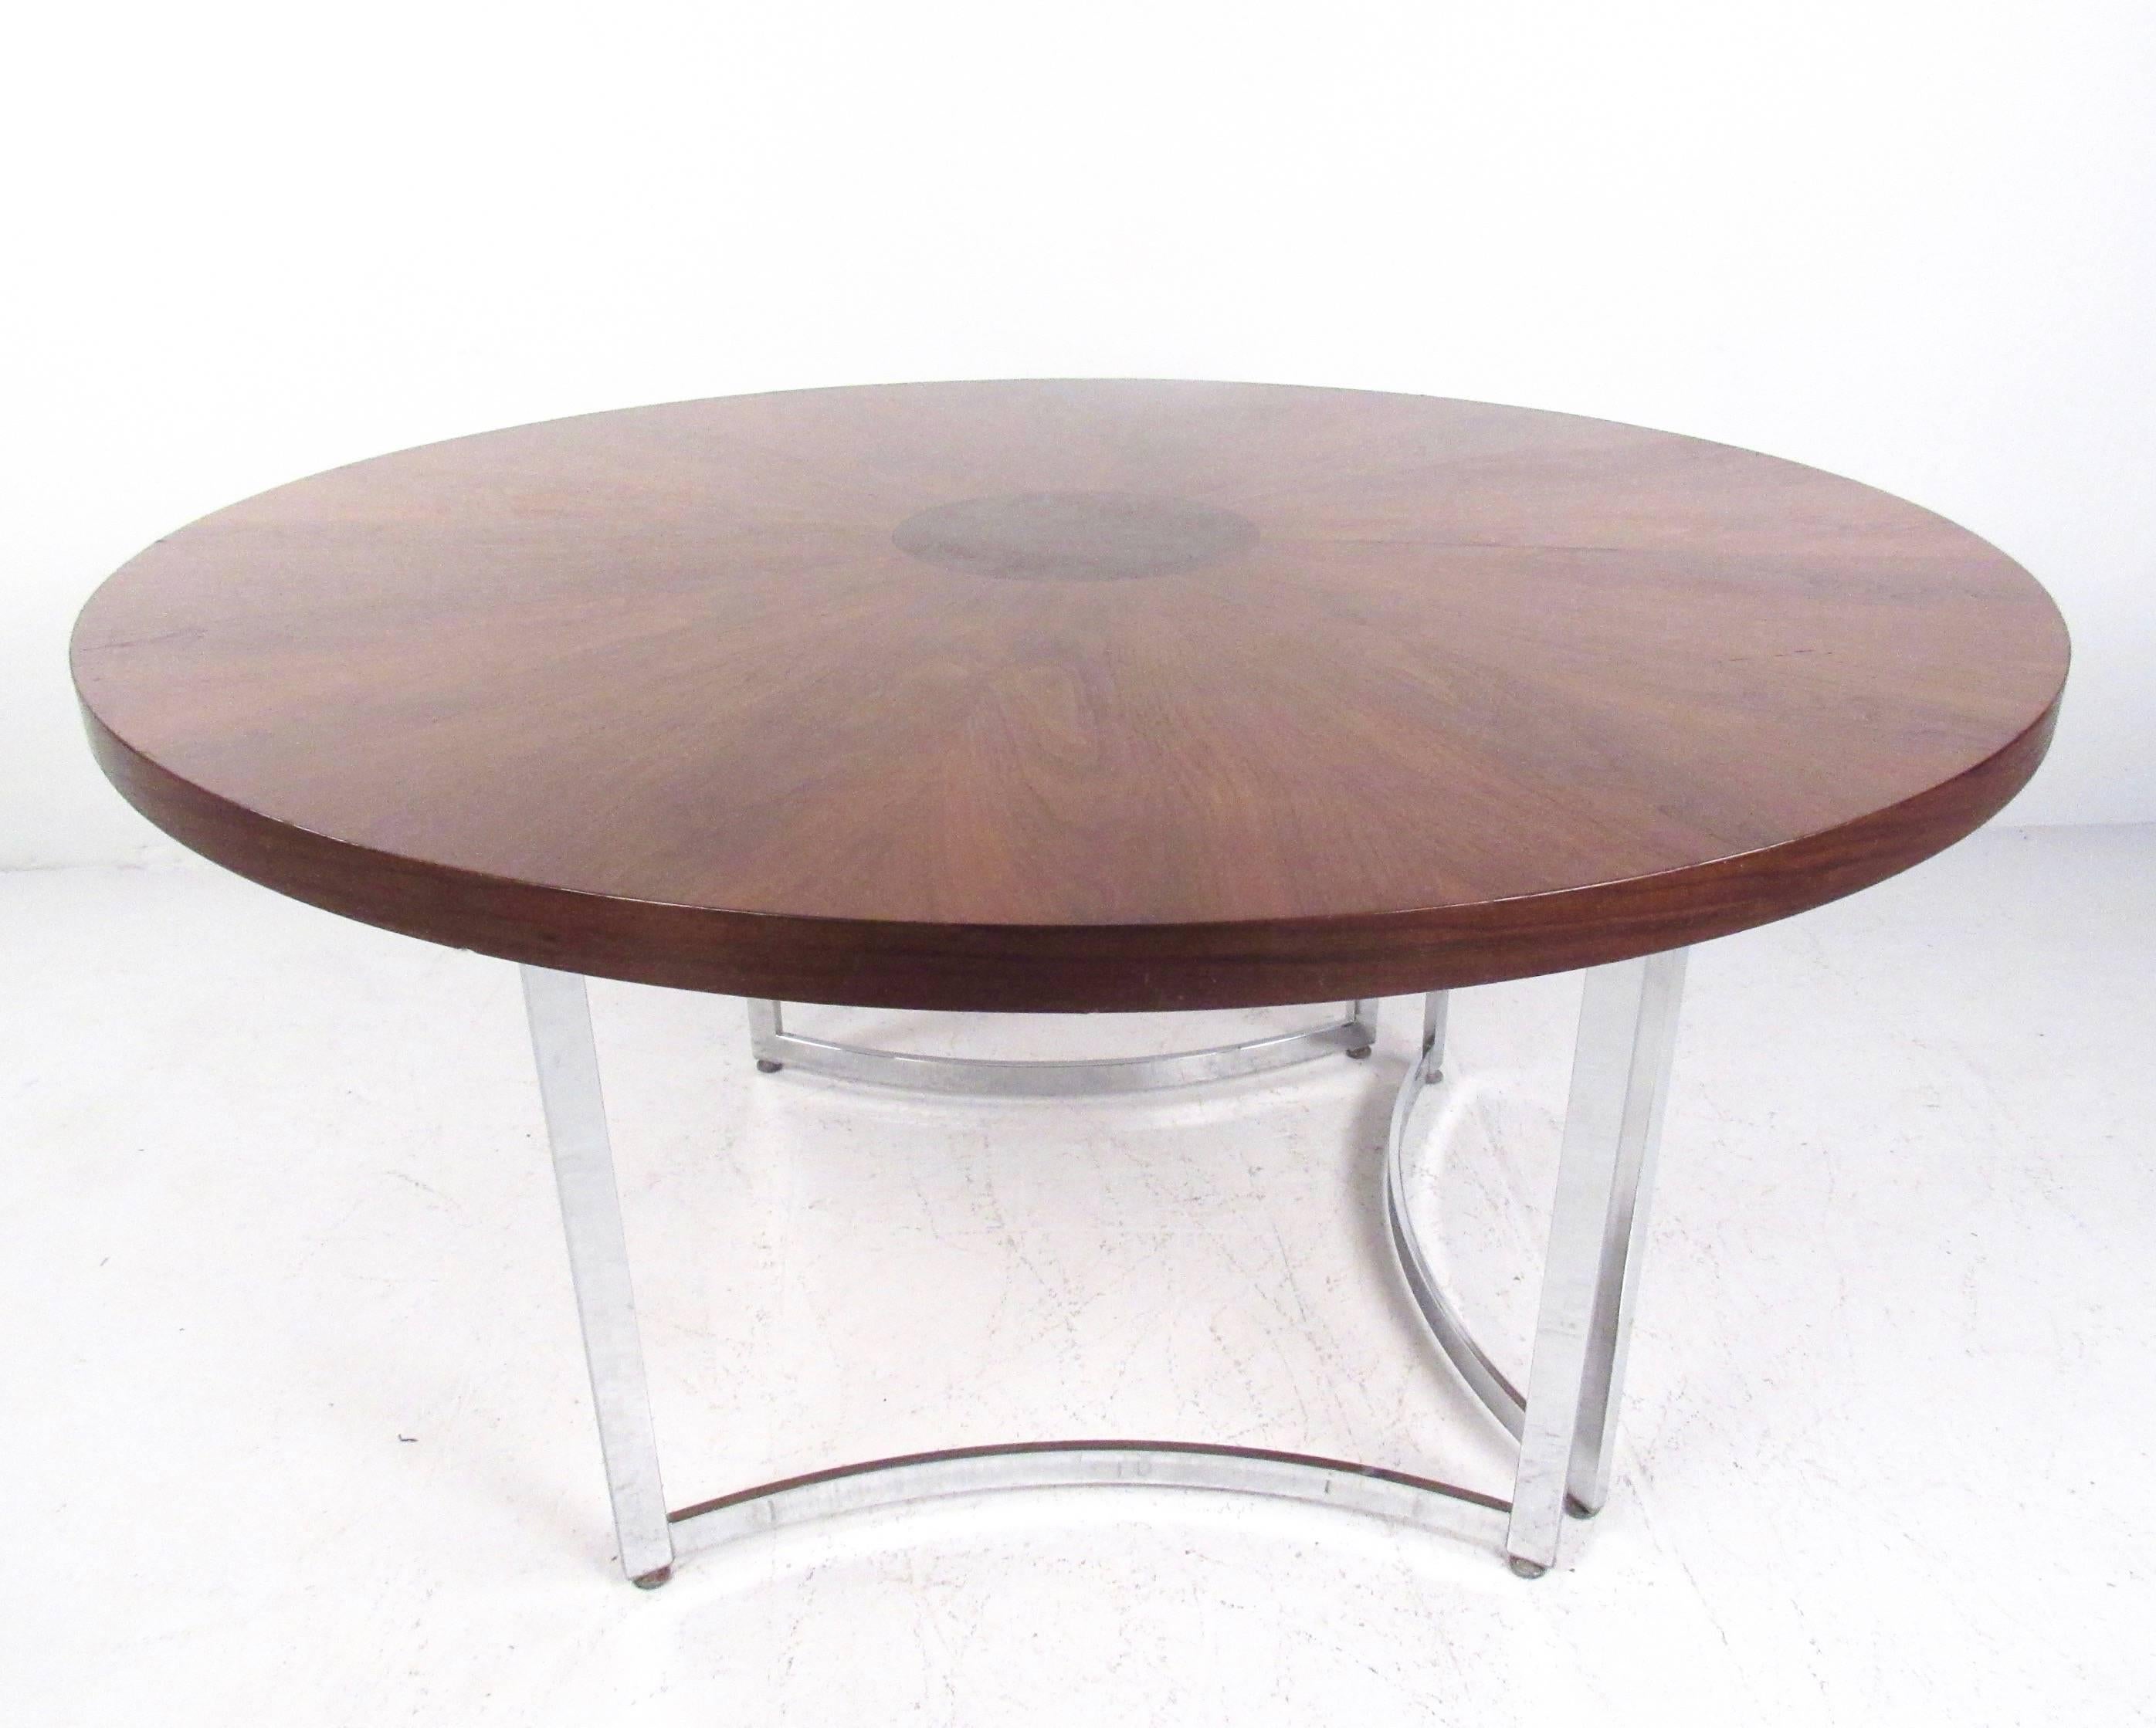 This vintage circular dining table features a beautiful burl wood marquetry top with a stylish sculpted chrome base. The sturdy Mid-Century centre table makes a lovely addition to dining room or kitchen, and offers a spacious round tabletop for